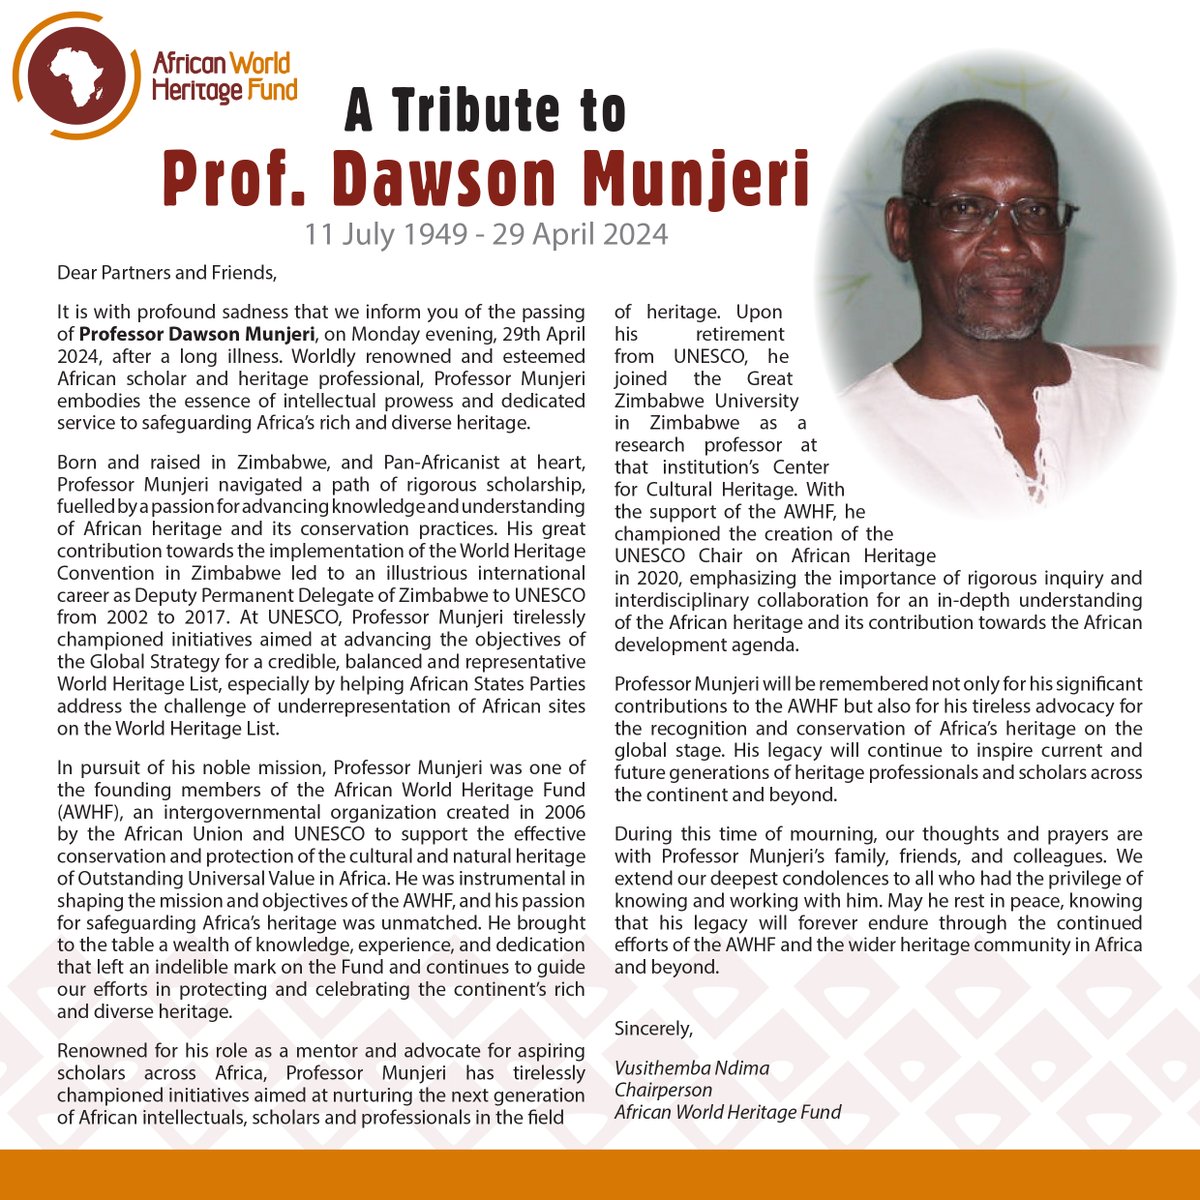 In loving memory of Professor Dawson Munjeri, a founding member of the African World Heritage Fund. May he rest in peace, knowing his legacy will forever endure through the continued efforts of the AWHF and the wider heritage community in Africa.